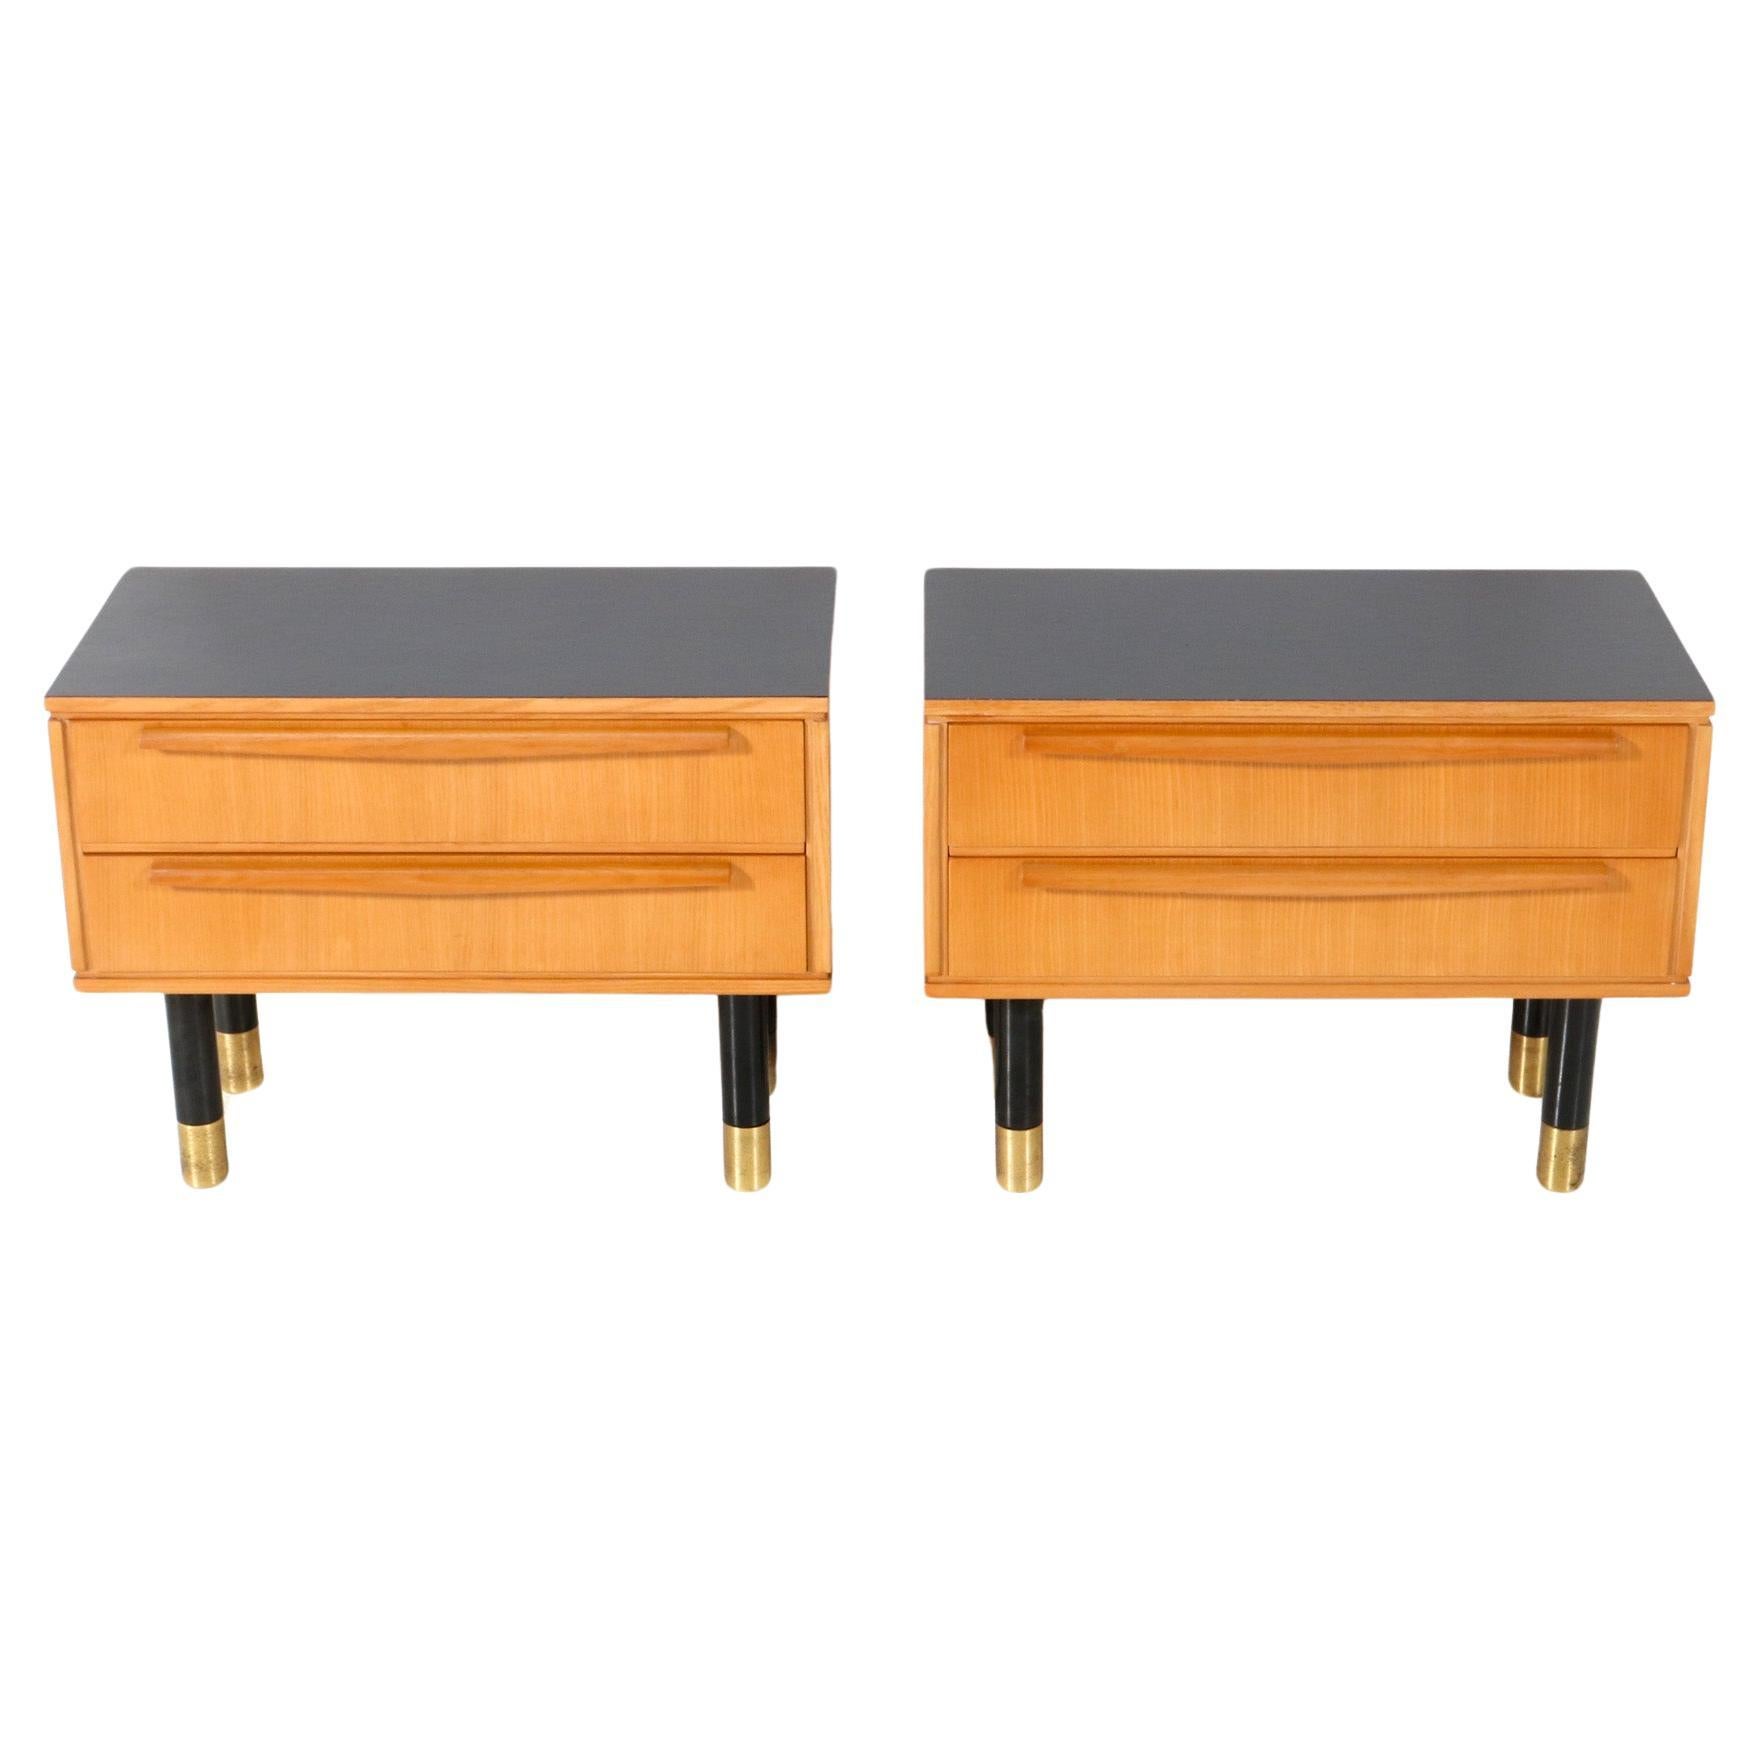 Pair of Mid-Century Modern Nightstands or Bedside Tables, 1950s